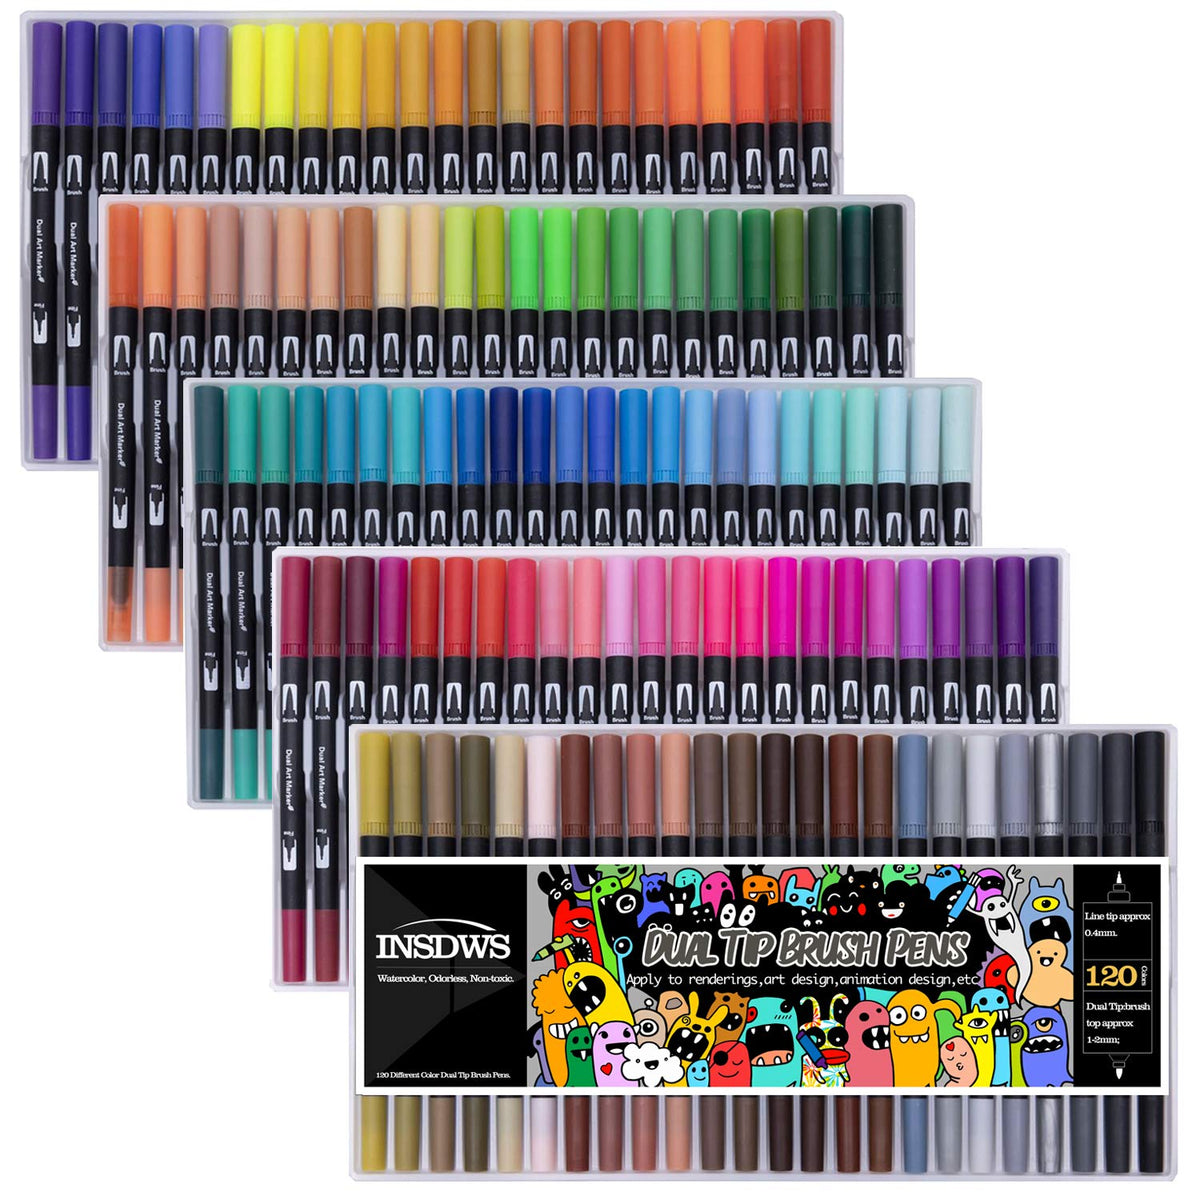 Hethrone 100 Colors Dual Brush Pens Colored Markers with 0.4mm Fine-Liner Tip